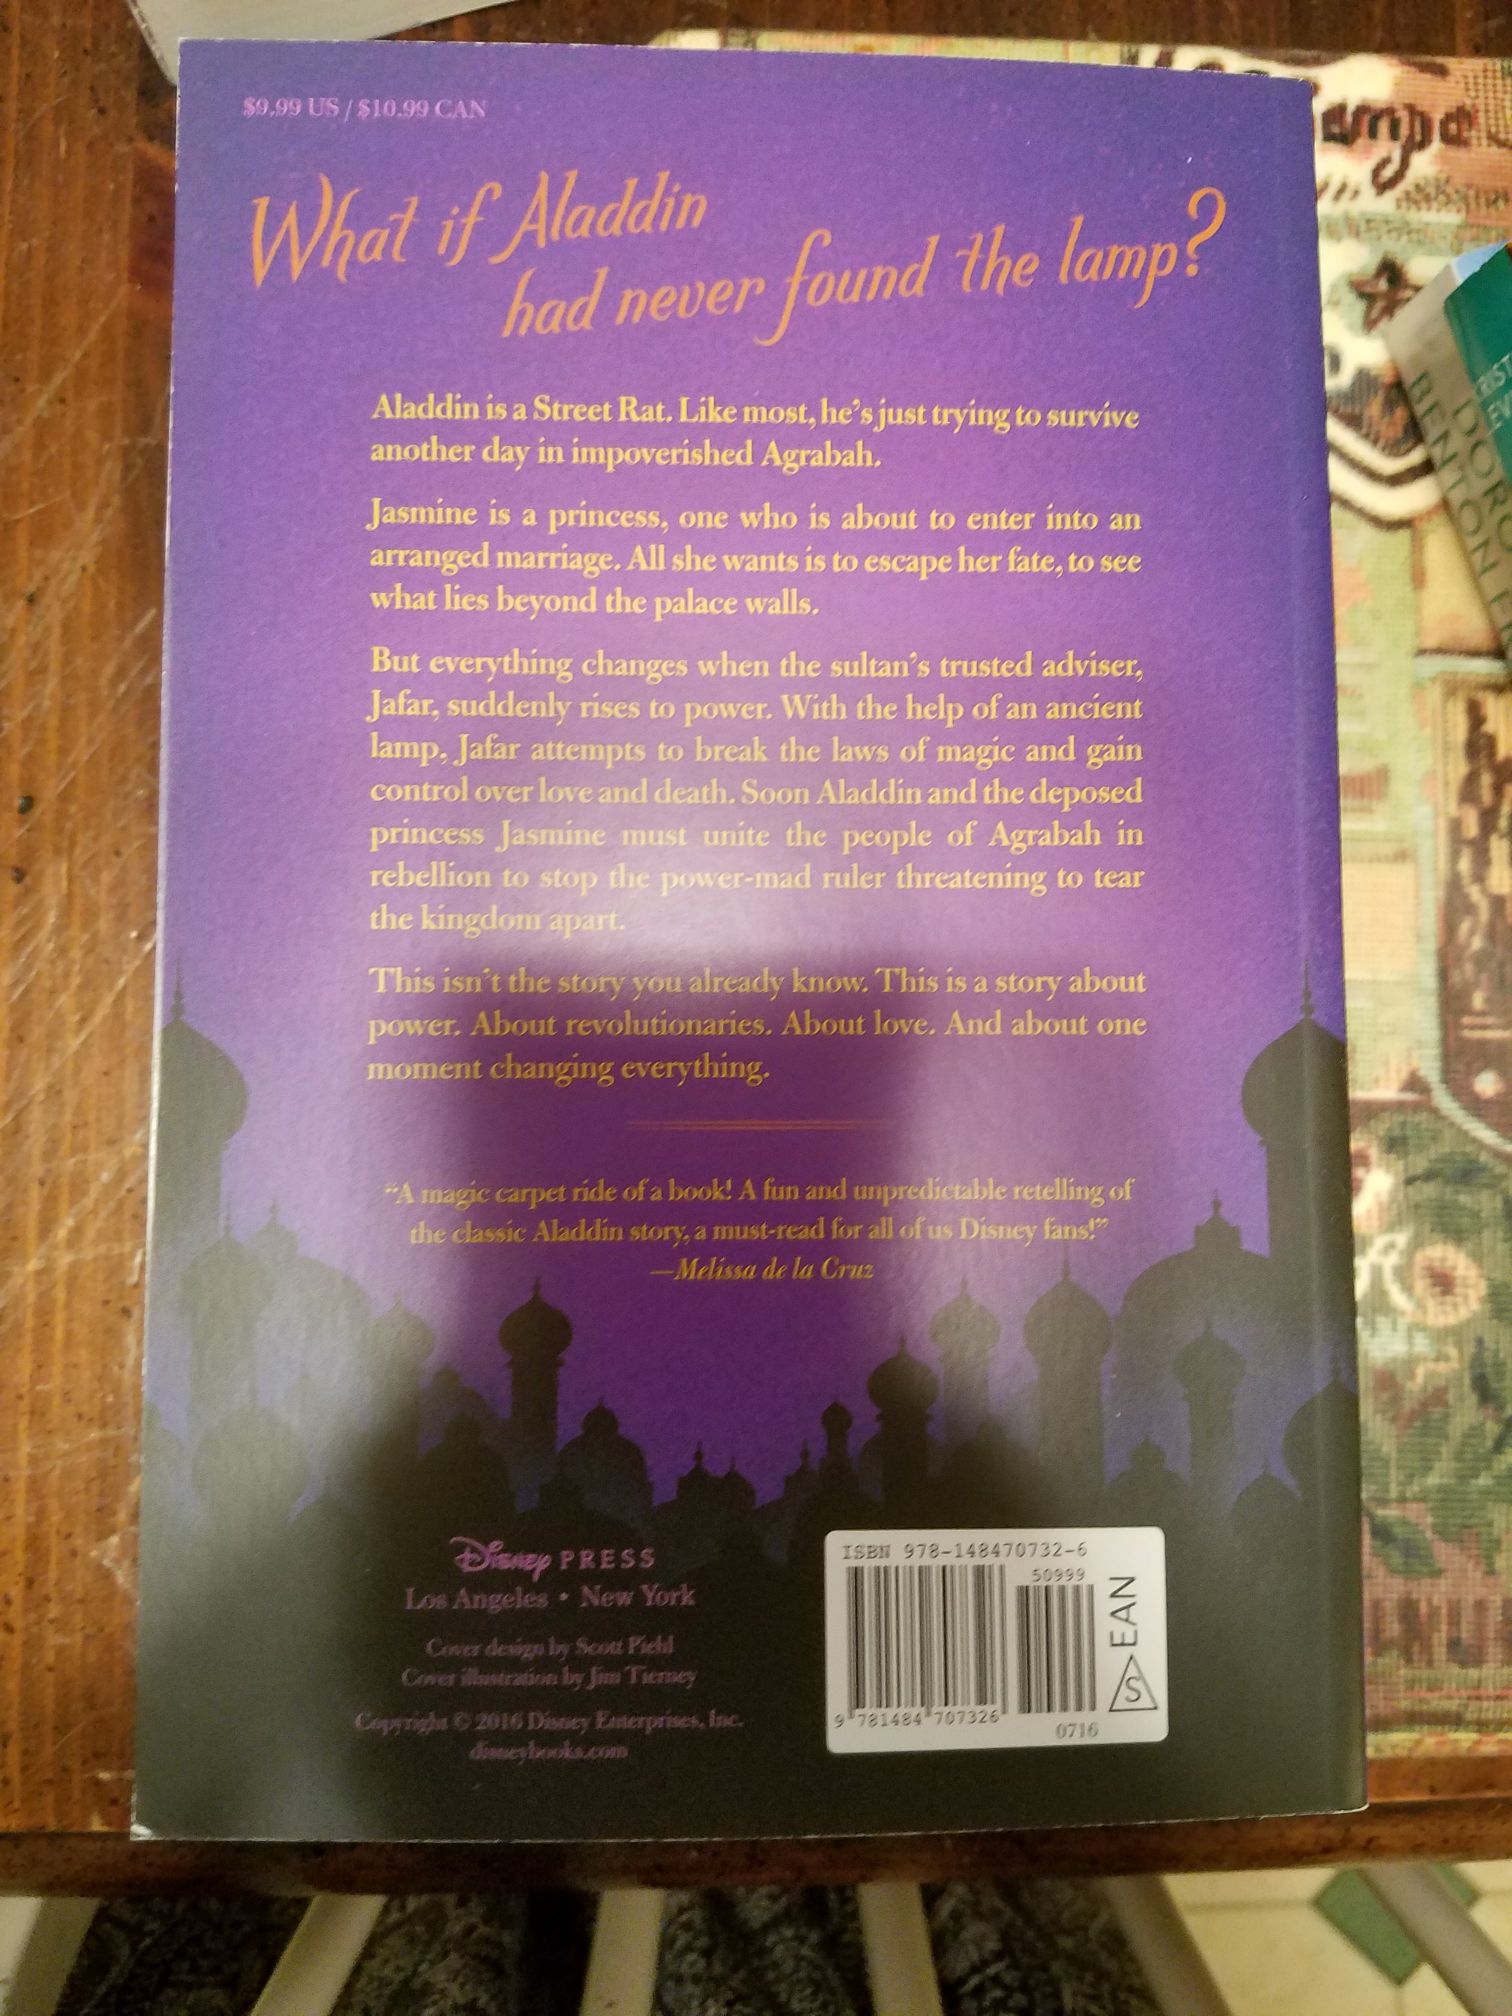 Disney Twisted Tales #1: A Whole New World - Braswell, Liz (Disney Hyperion - Paperback) book collectible [Barcode 9781484707326] - Main Image 2